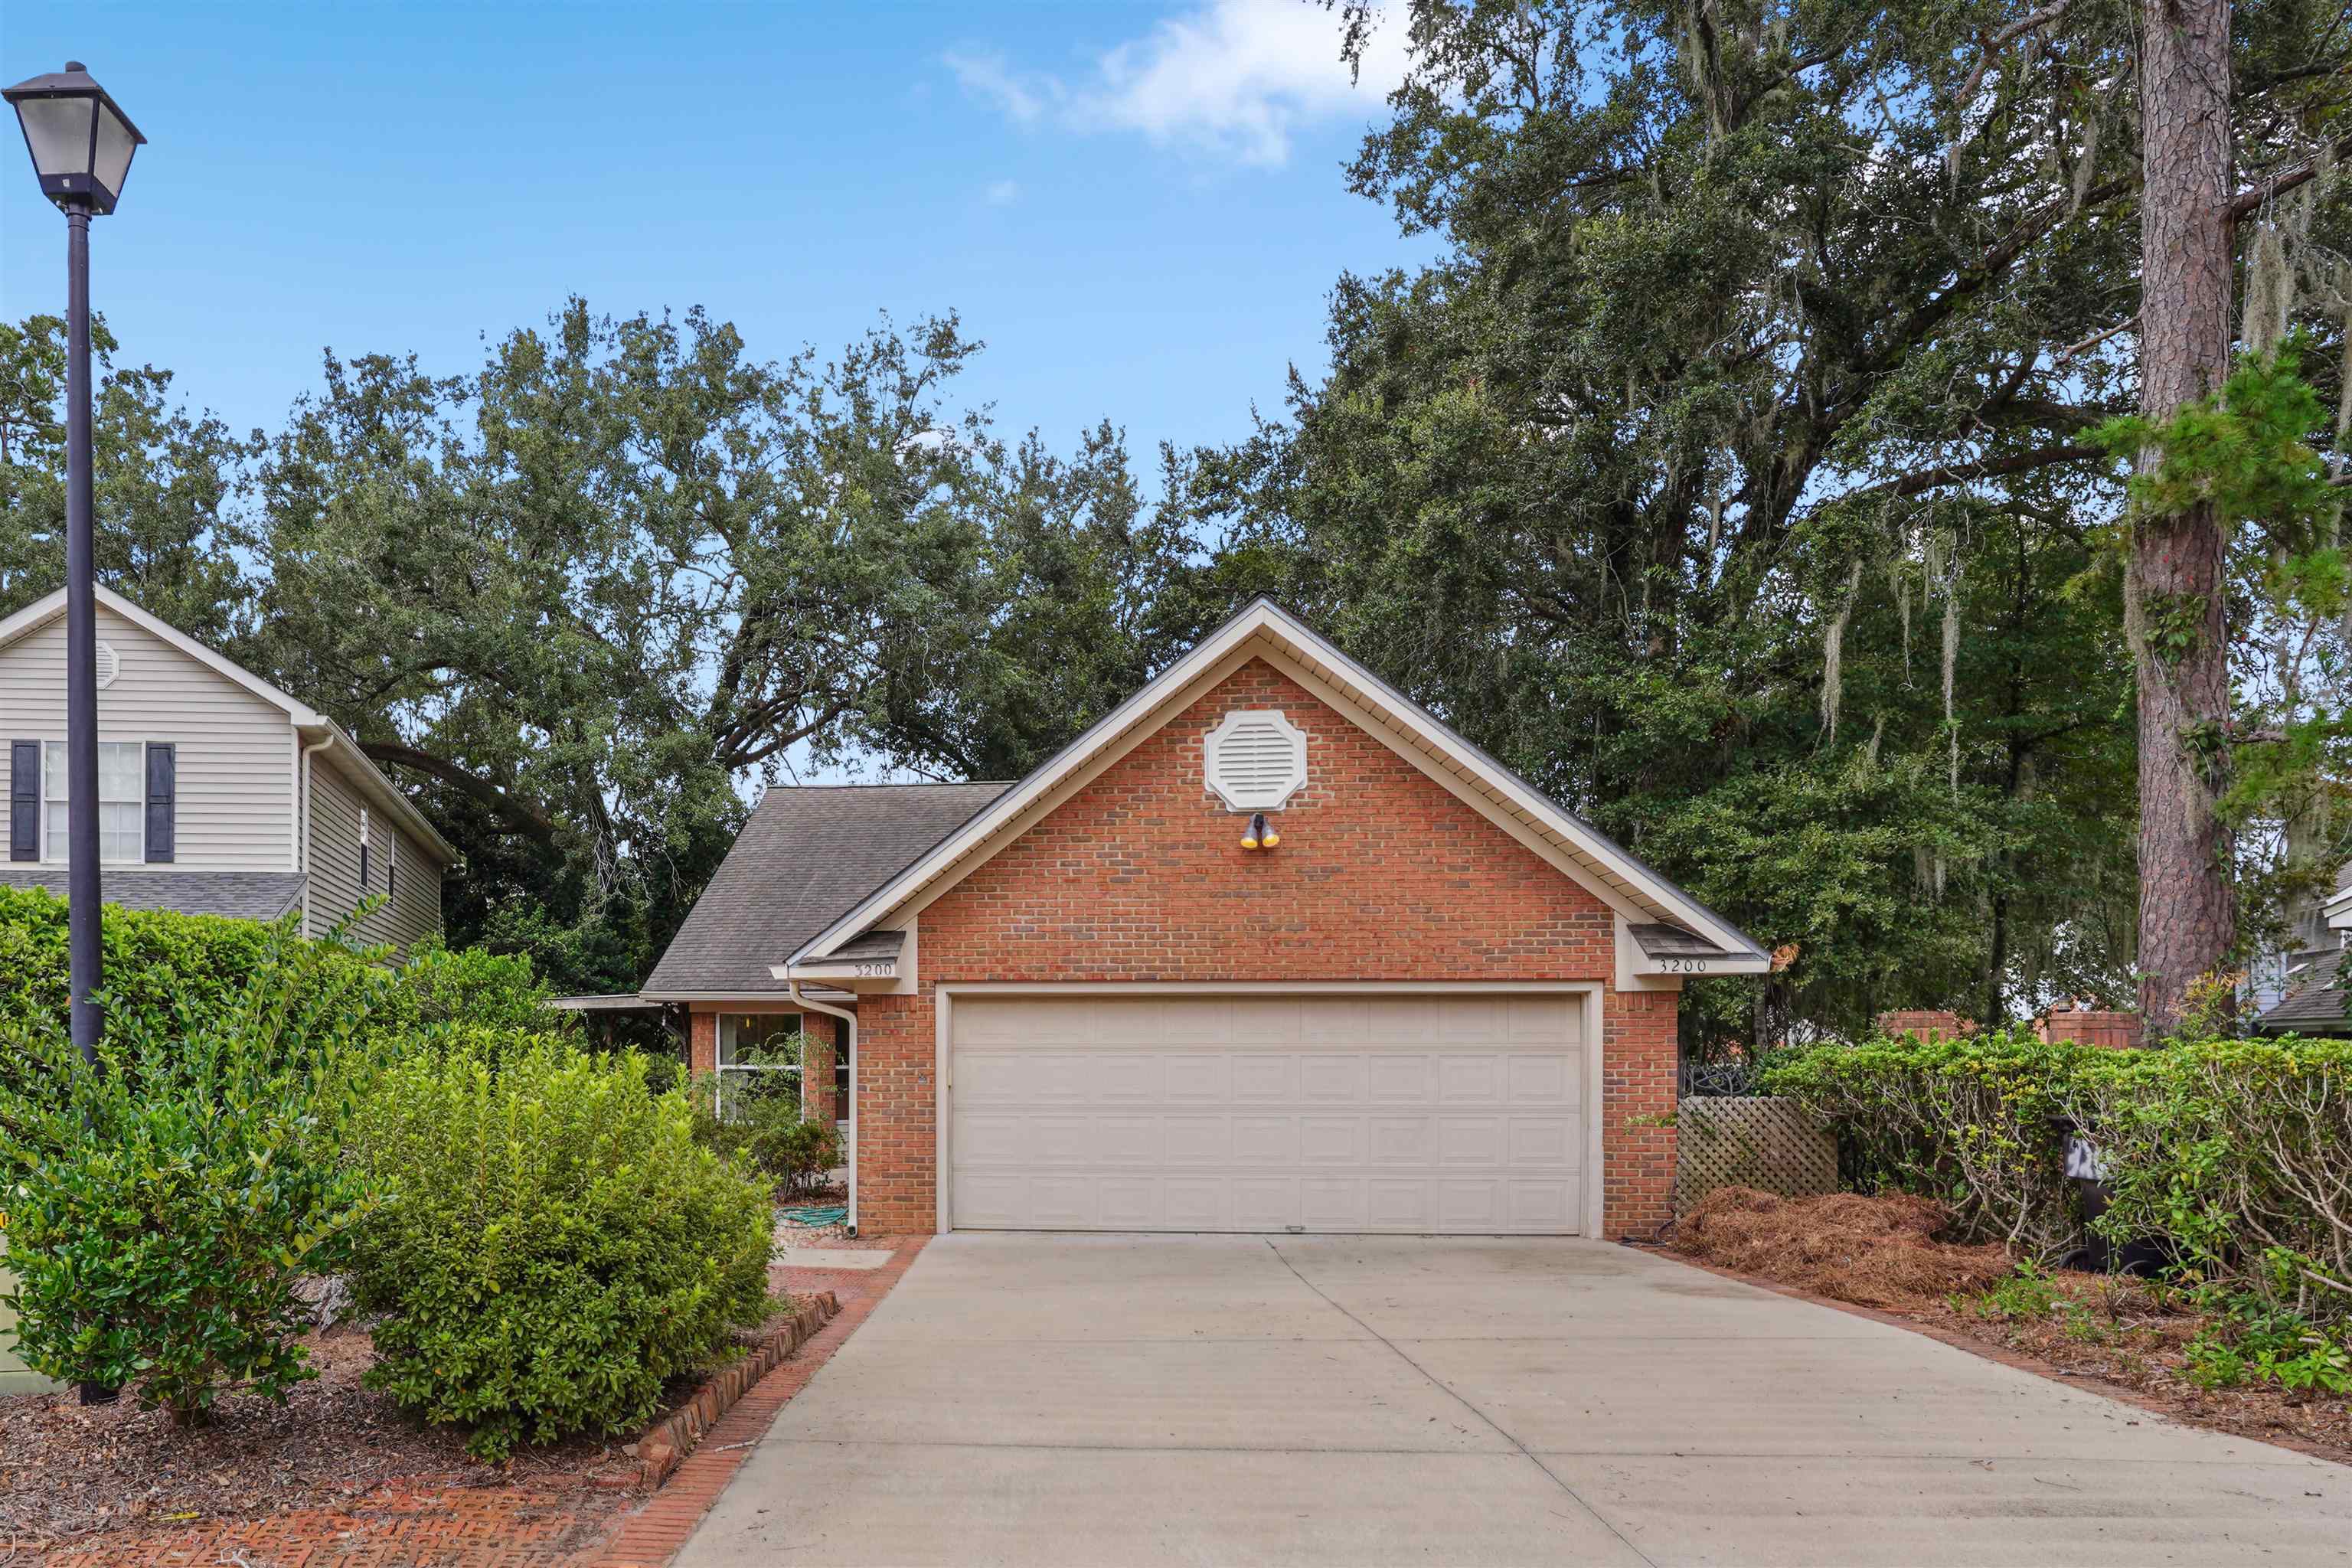 3200 Castle Court, TALLAHASSEE, FL 32309